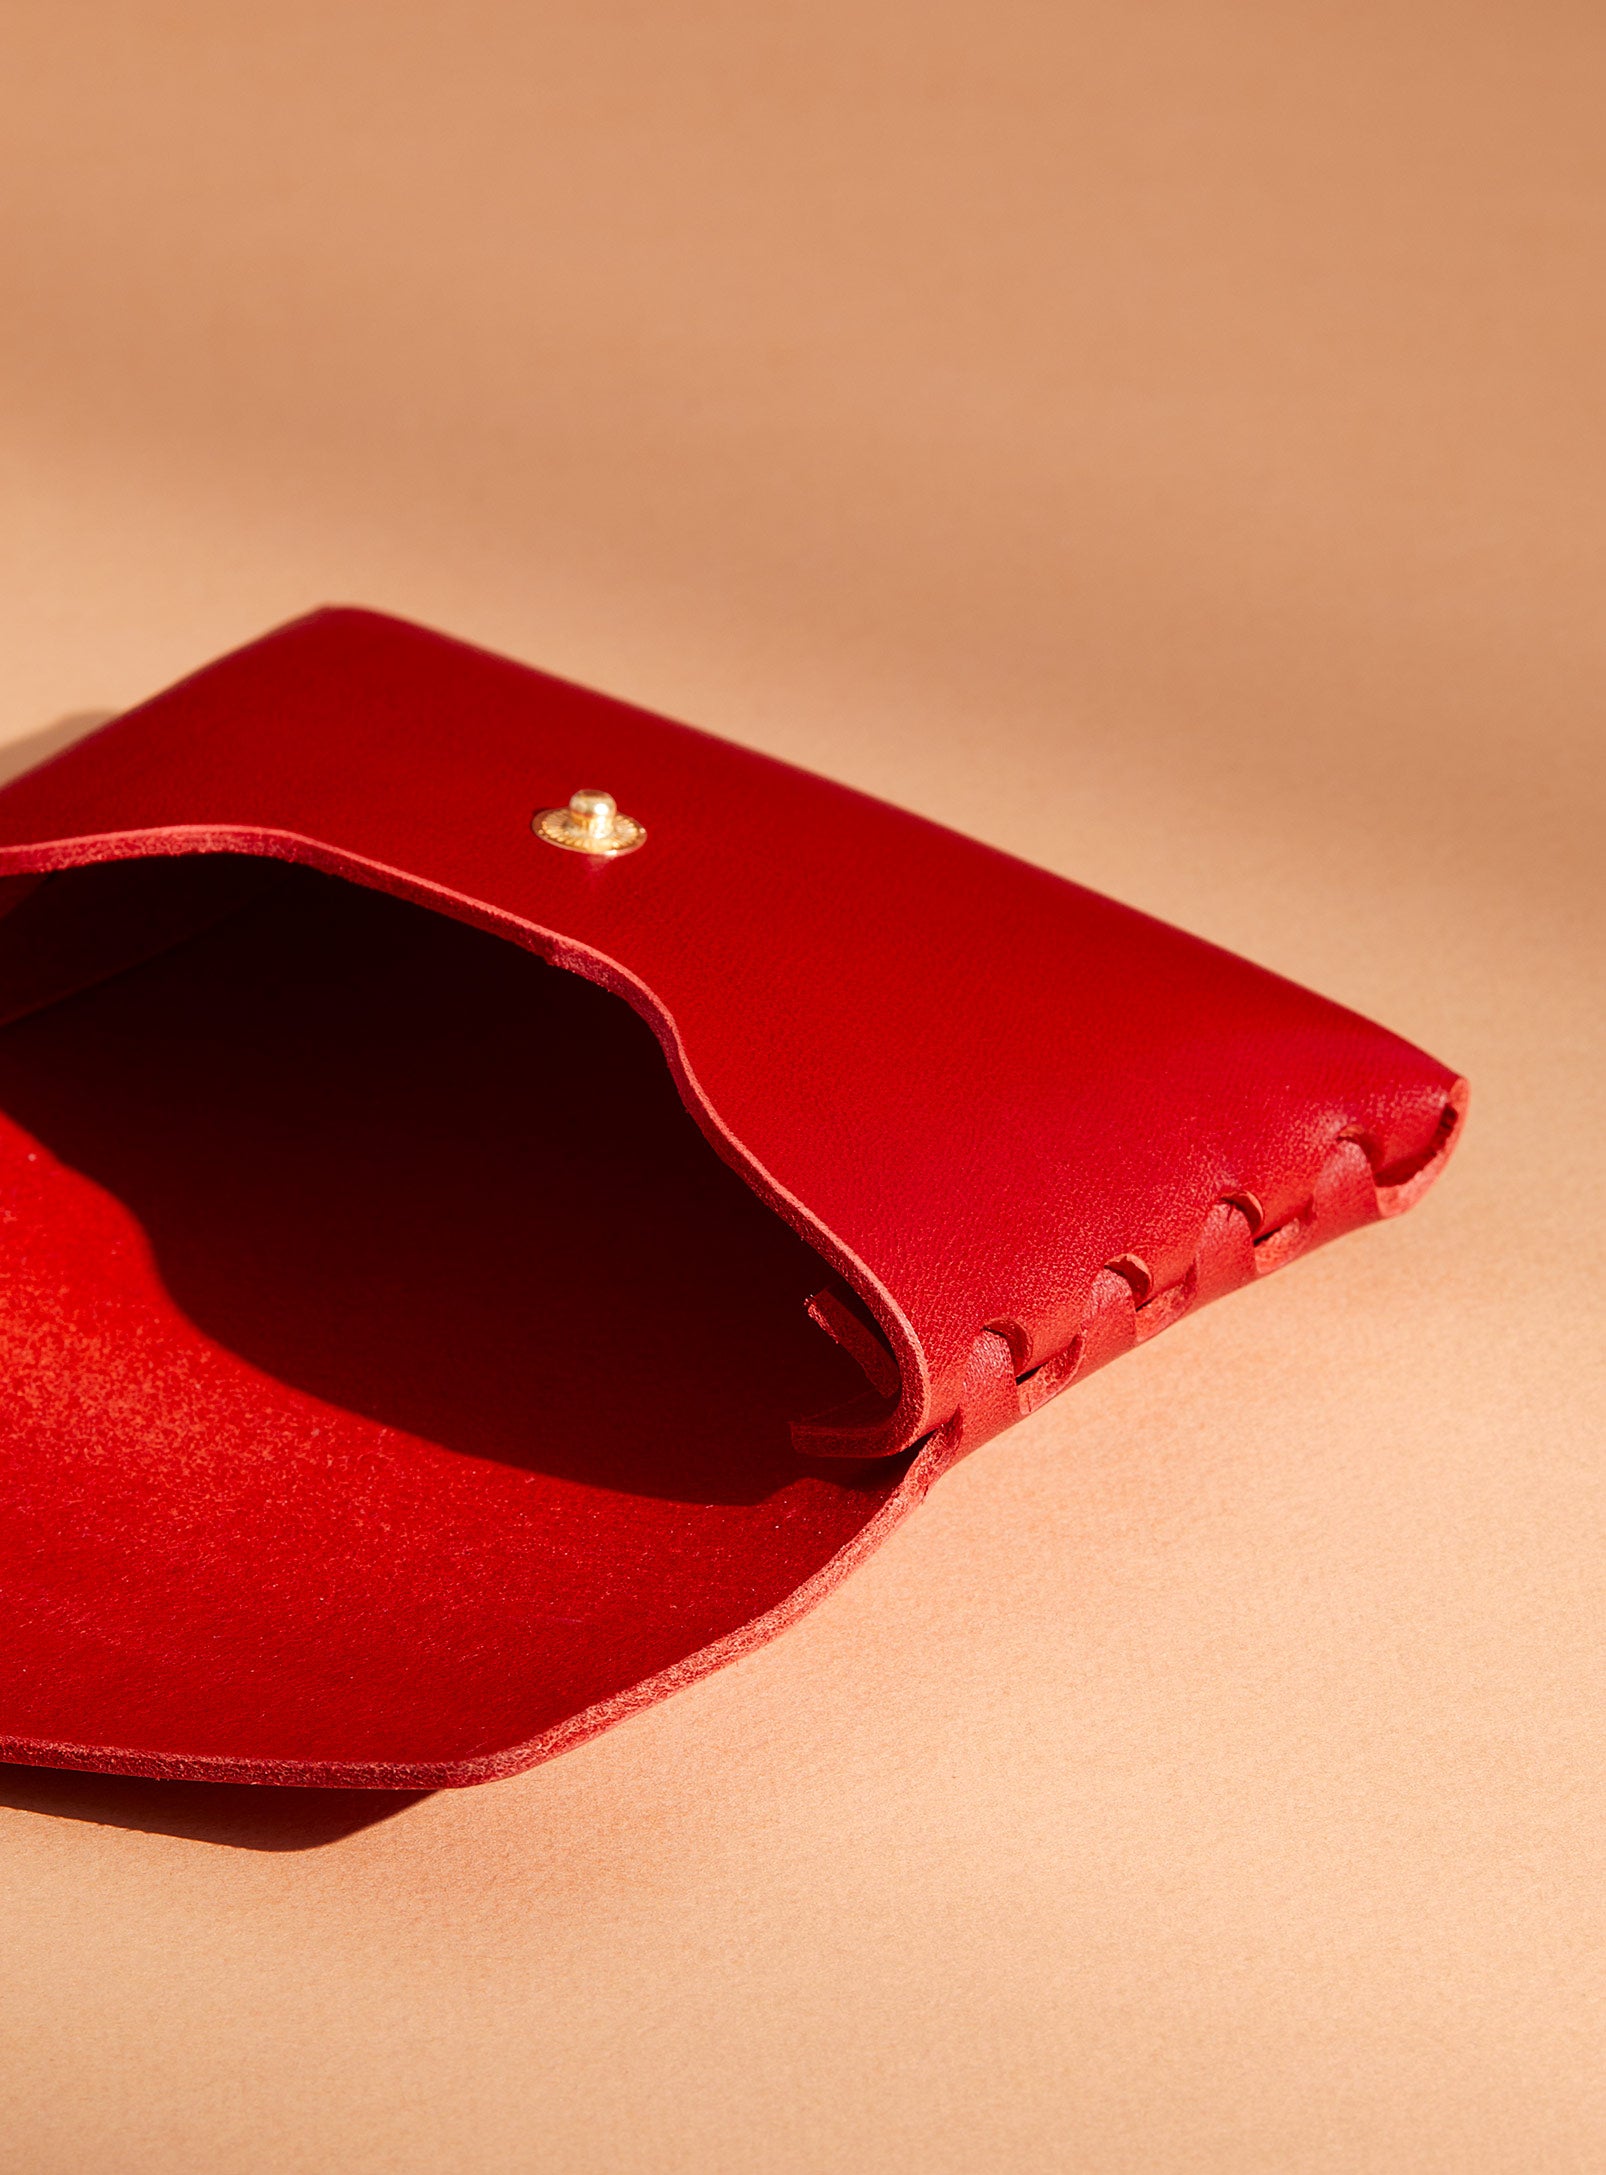 An inside look at modjūl's classic pouch in red leather. A compact open wallet with endless possibilities, perfect for holding cards, keys or loose change. Handmade in Canada and joined with the signature modjūl joinery and quality brass hardware.